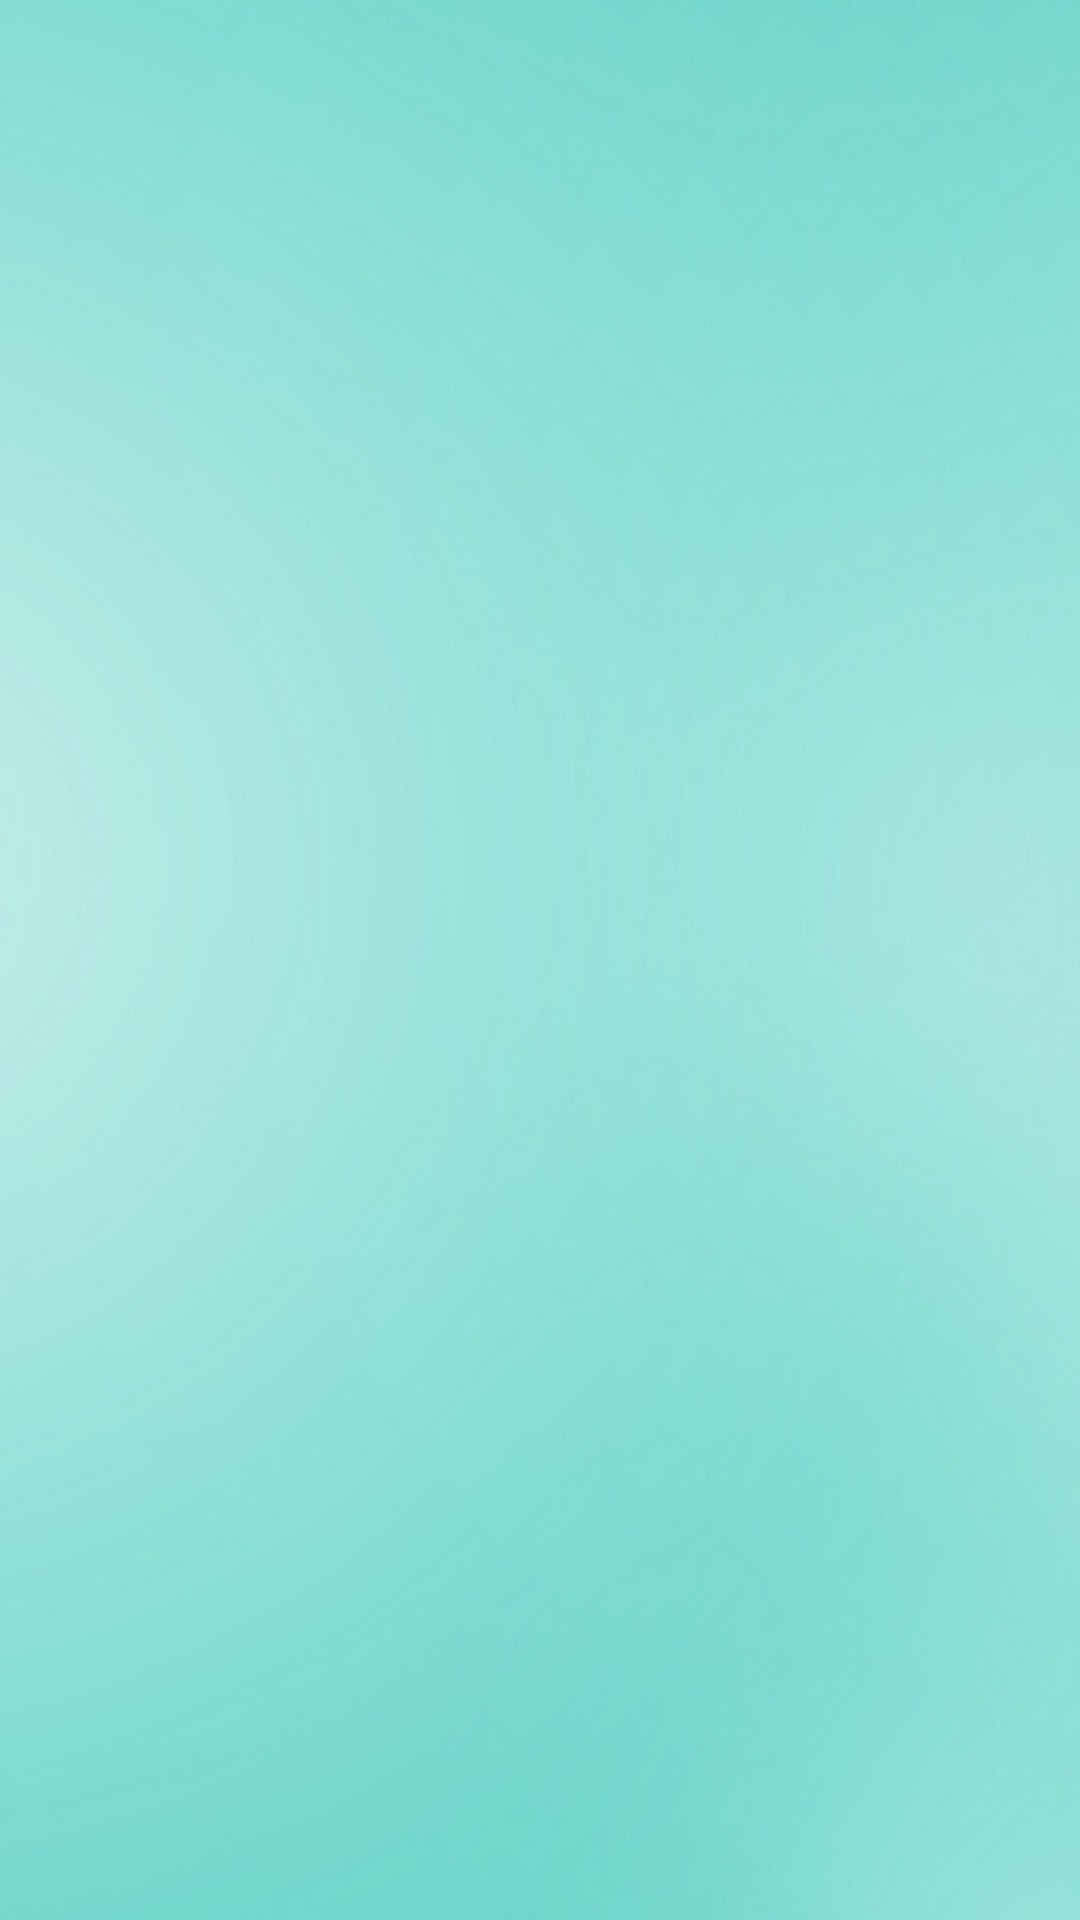 Mint Green Backgrounds For Android with resolution 1080X1920 pixel. You can make this wallpaper for your Android backgrounds, Tablet, Smartphones Screensavers and Mobile Phone Lock Screen